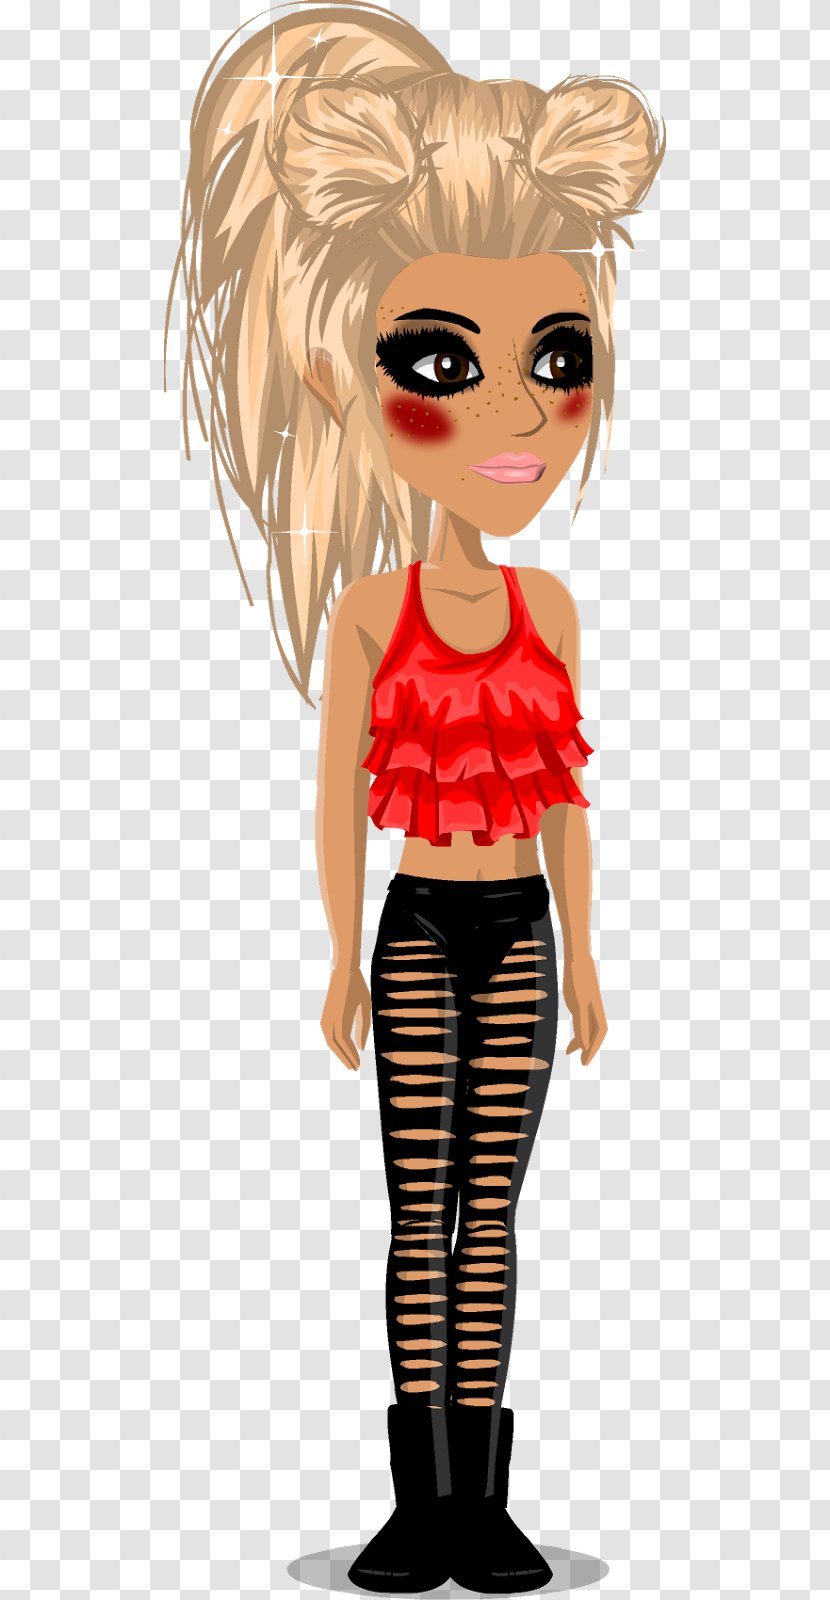 Cartoon Brown Hair Character Doll - Silhouette - Msp Transparent PNG